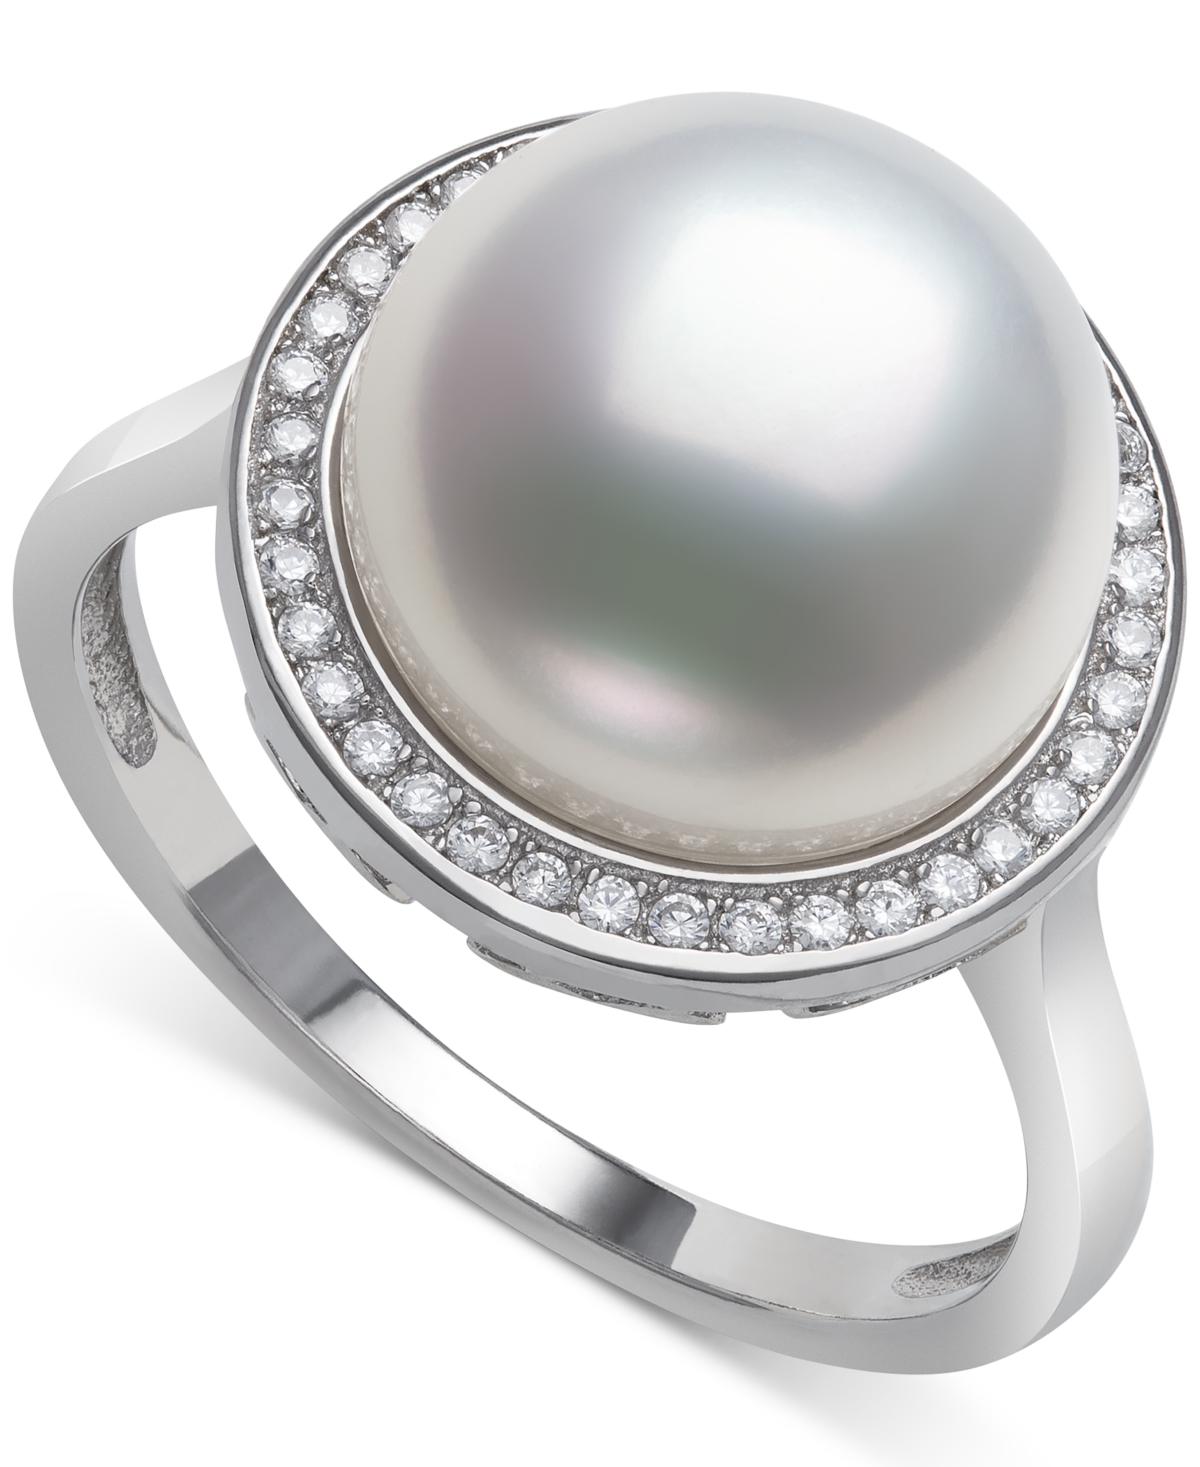 Belle de Mer Cultured Freshwater Button Pearl (11mm) & Cubic Zirconia Halo Ring in Sterling Silver